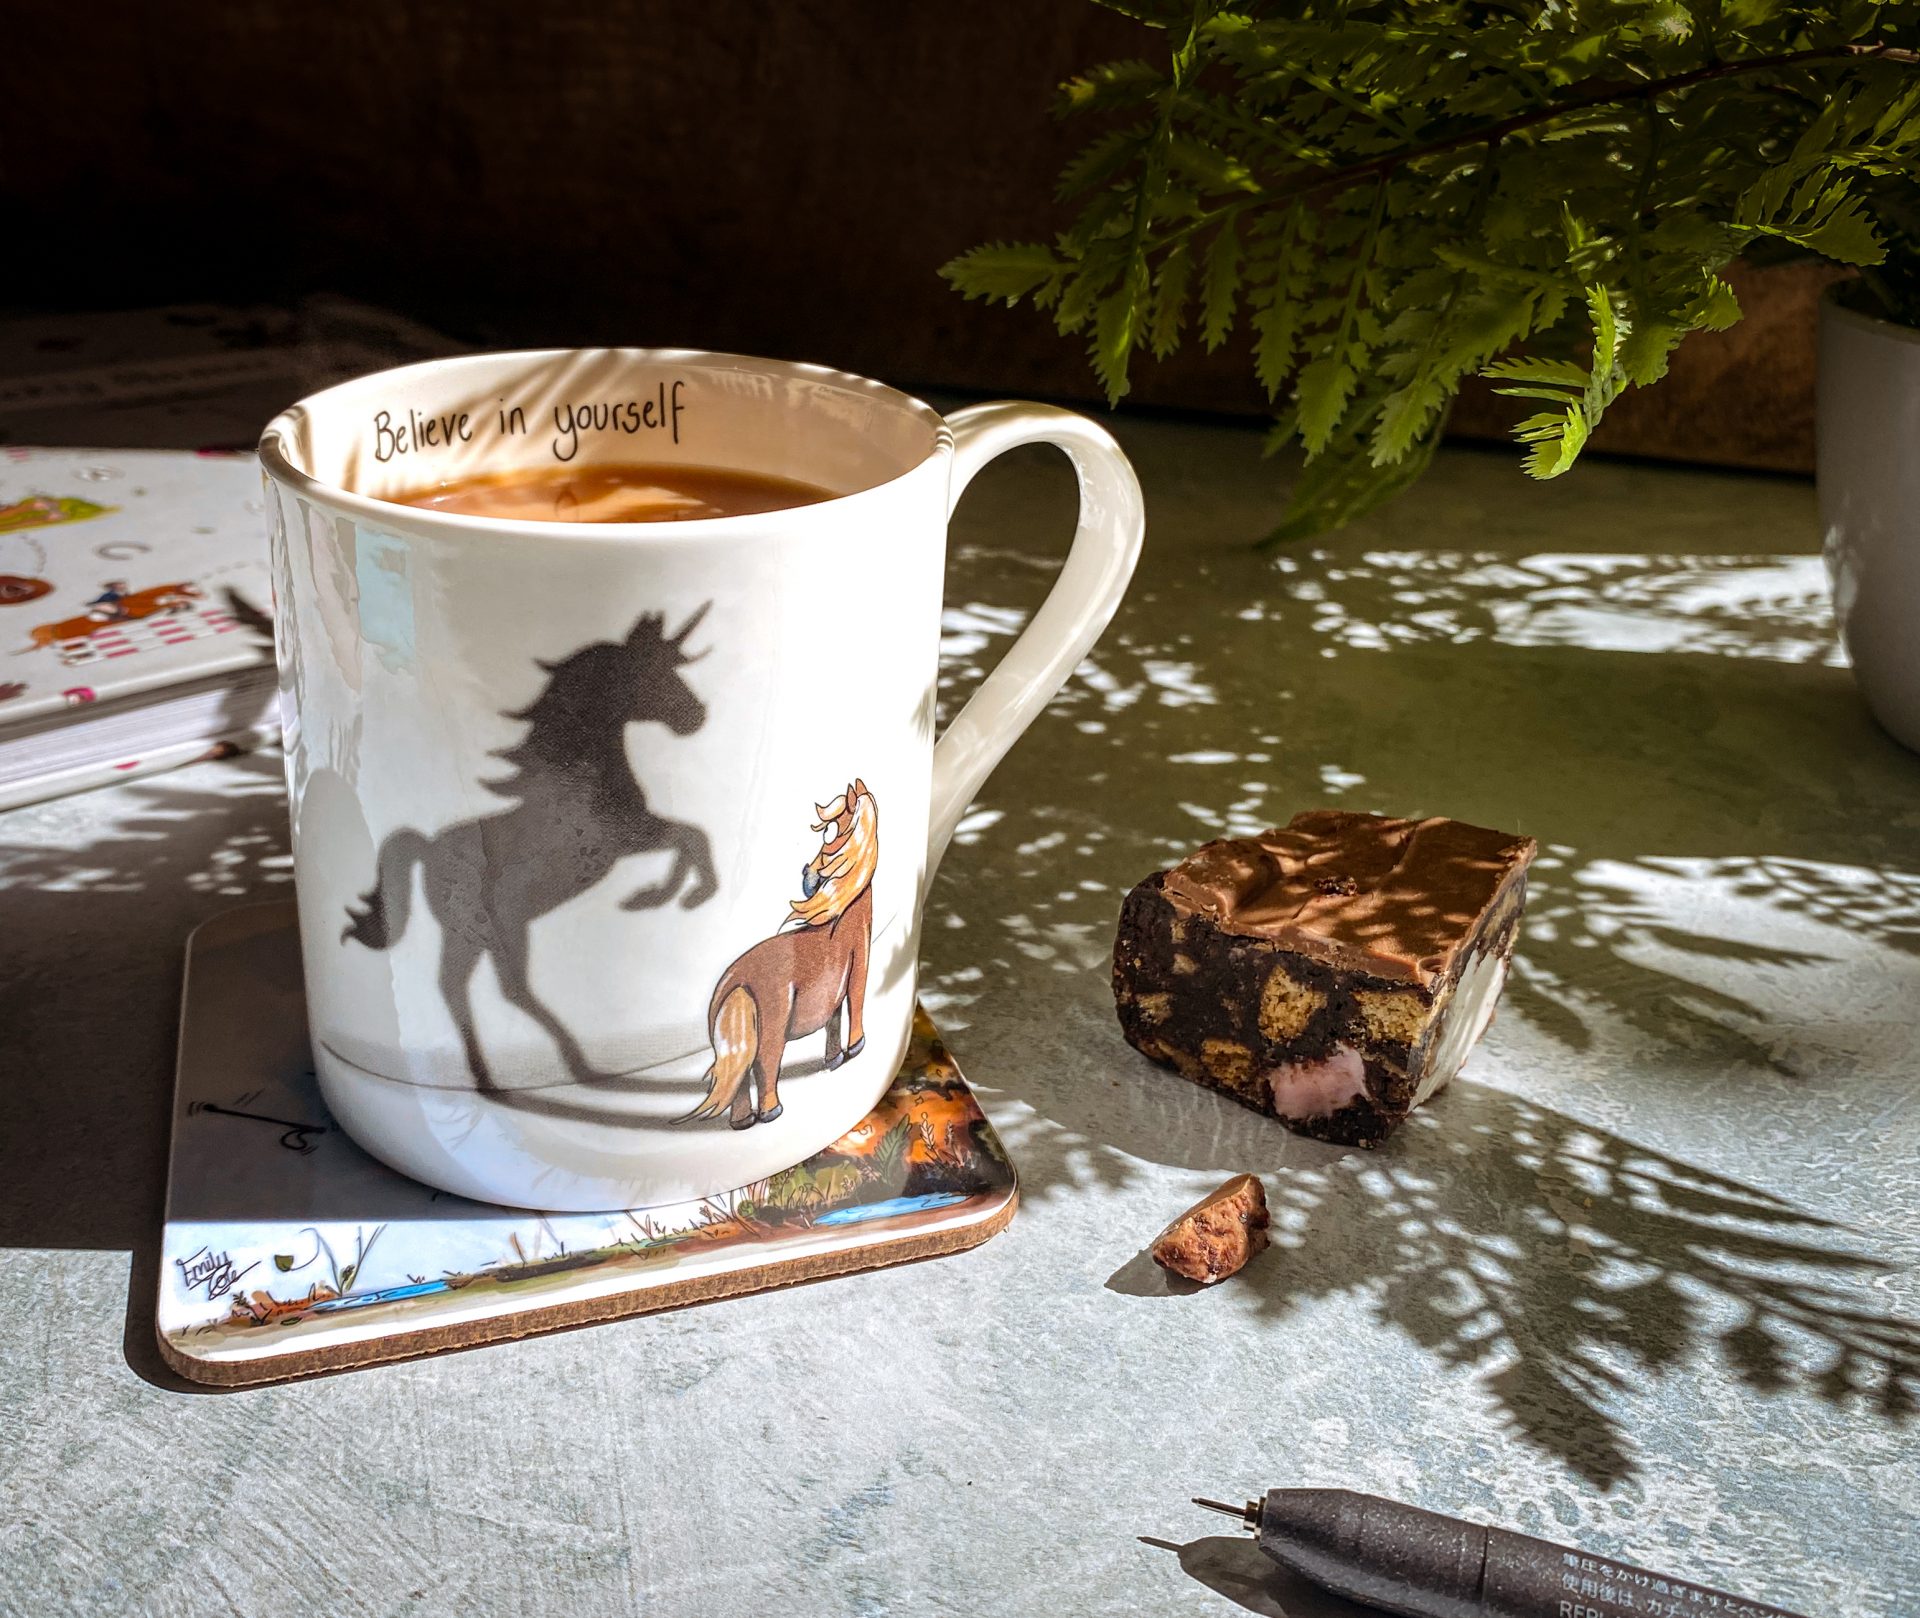 Image of Emily Cole's 'Believe in Yourself' Fine Bone China Mug, featuring a flaxen pony gazing at its unicorn shadow. An inspiring quote ' Believe in yourself' written along the inside rim.